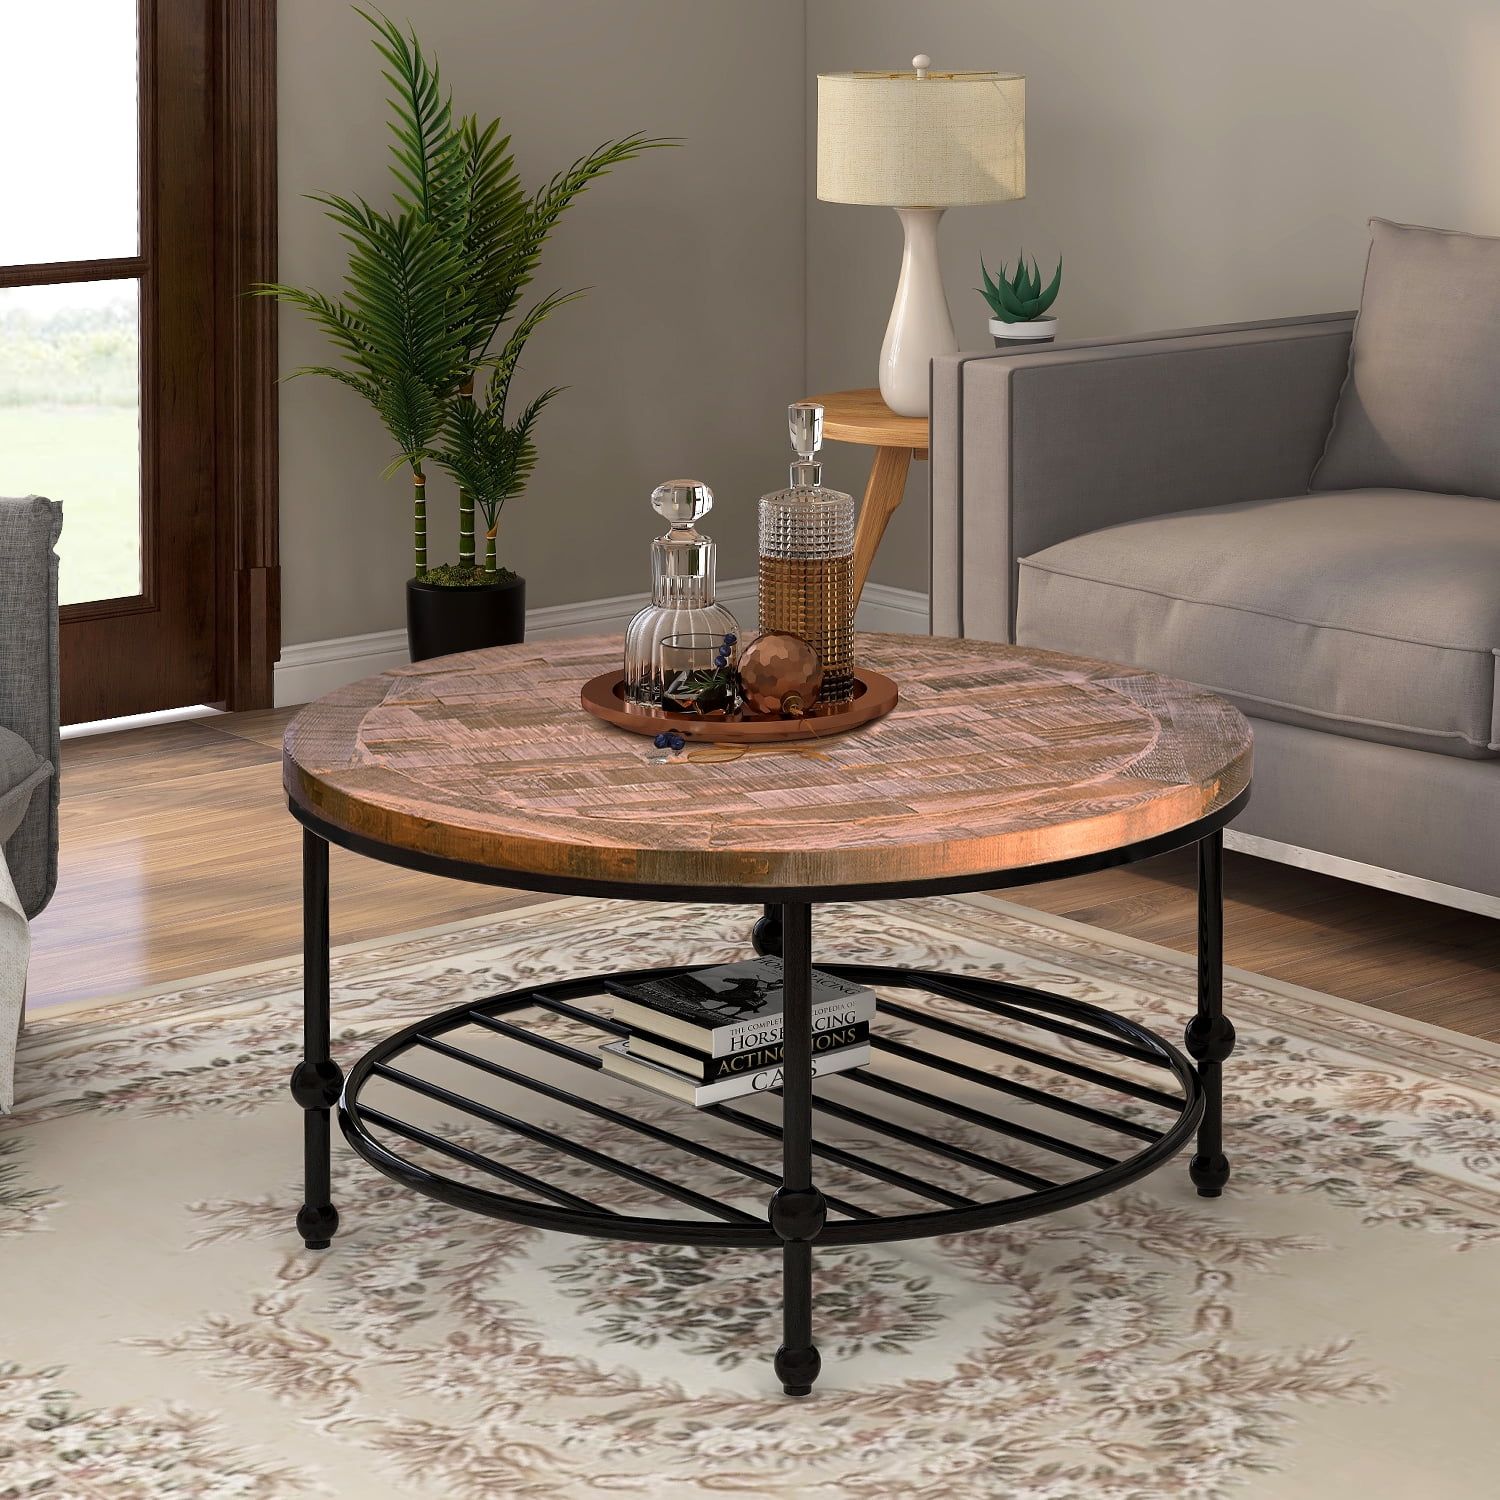 Rustic Natural Round Coffee Table With Storage Shelf For Living Room With Round Coffee Tables With Storage (View 4 of 20)